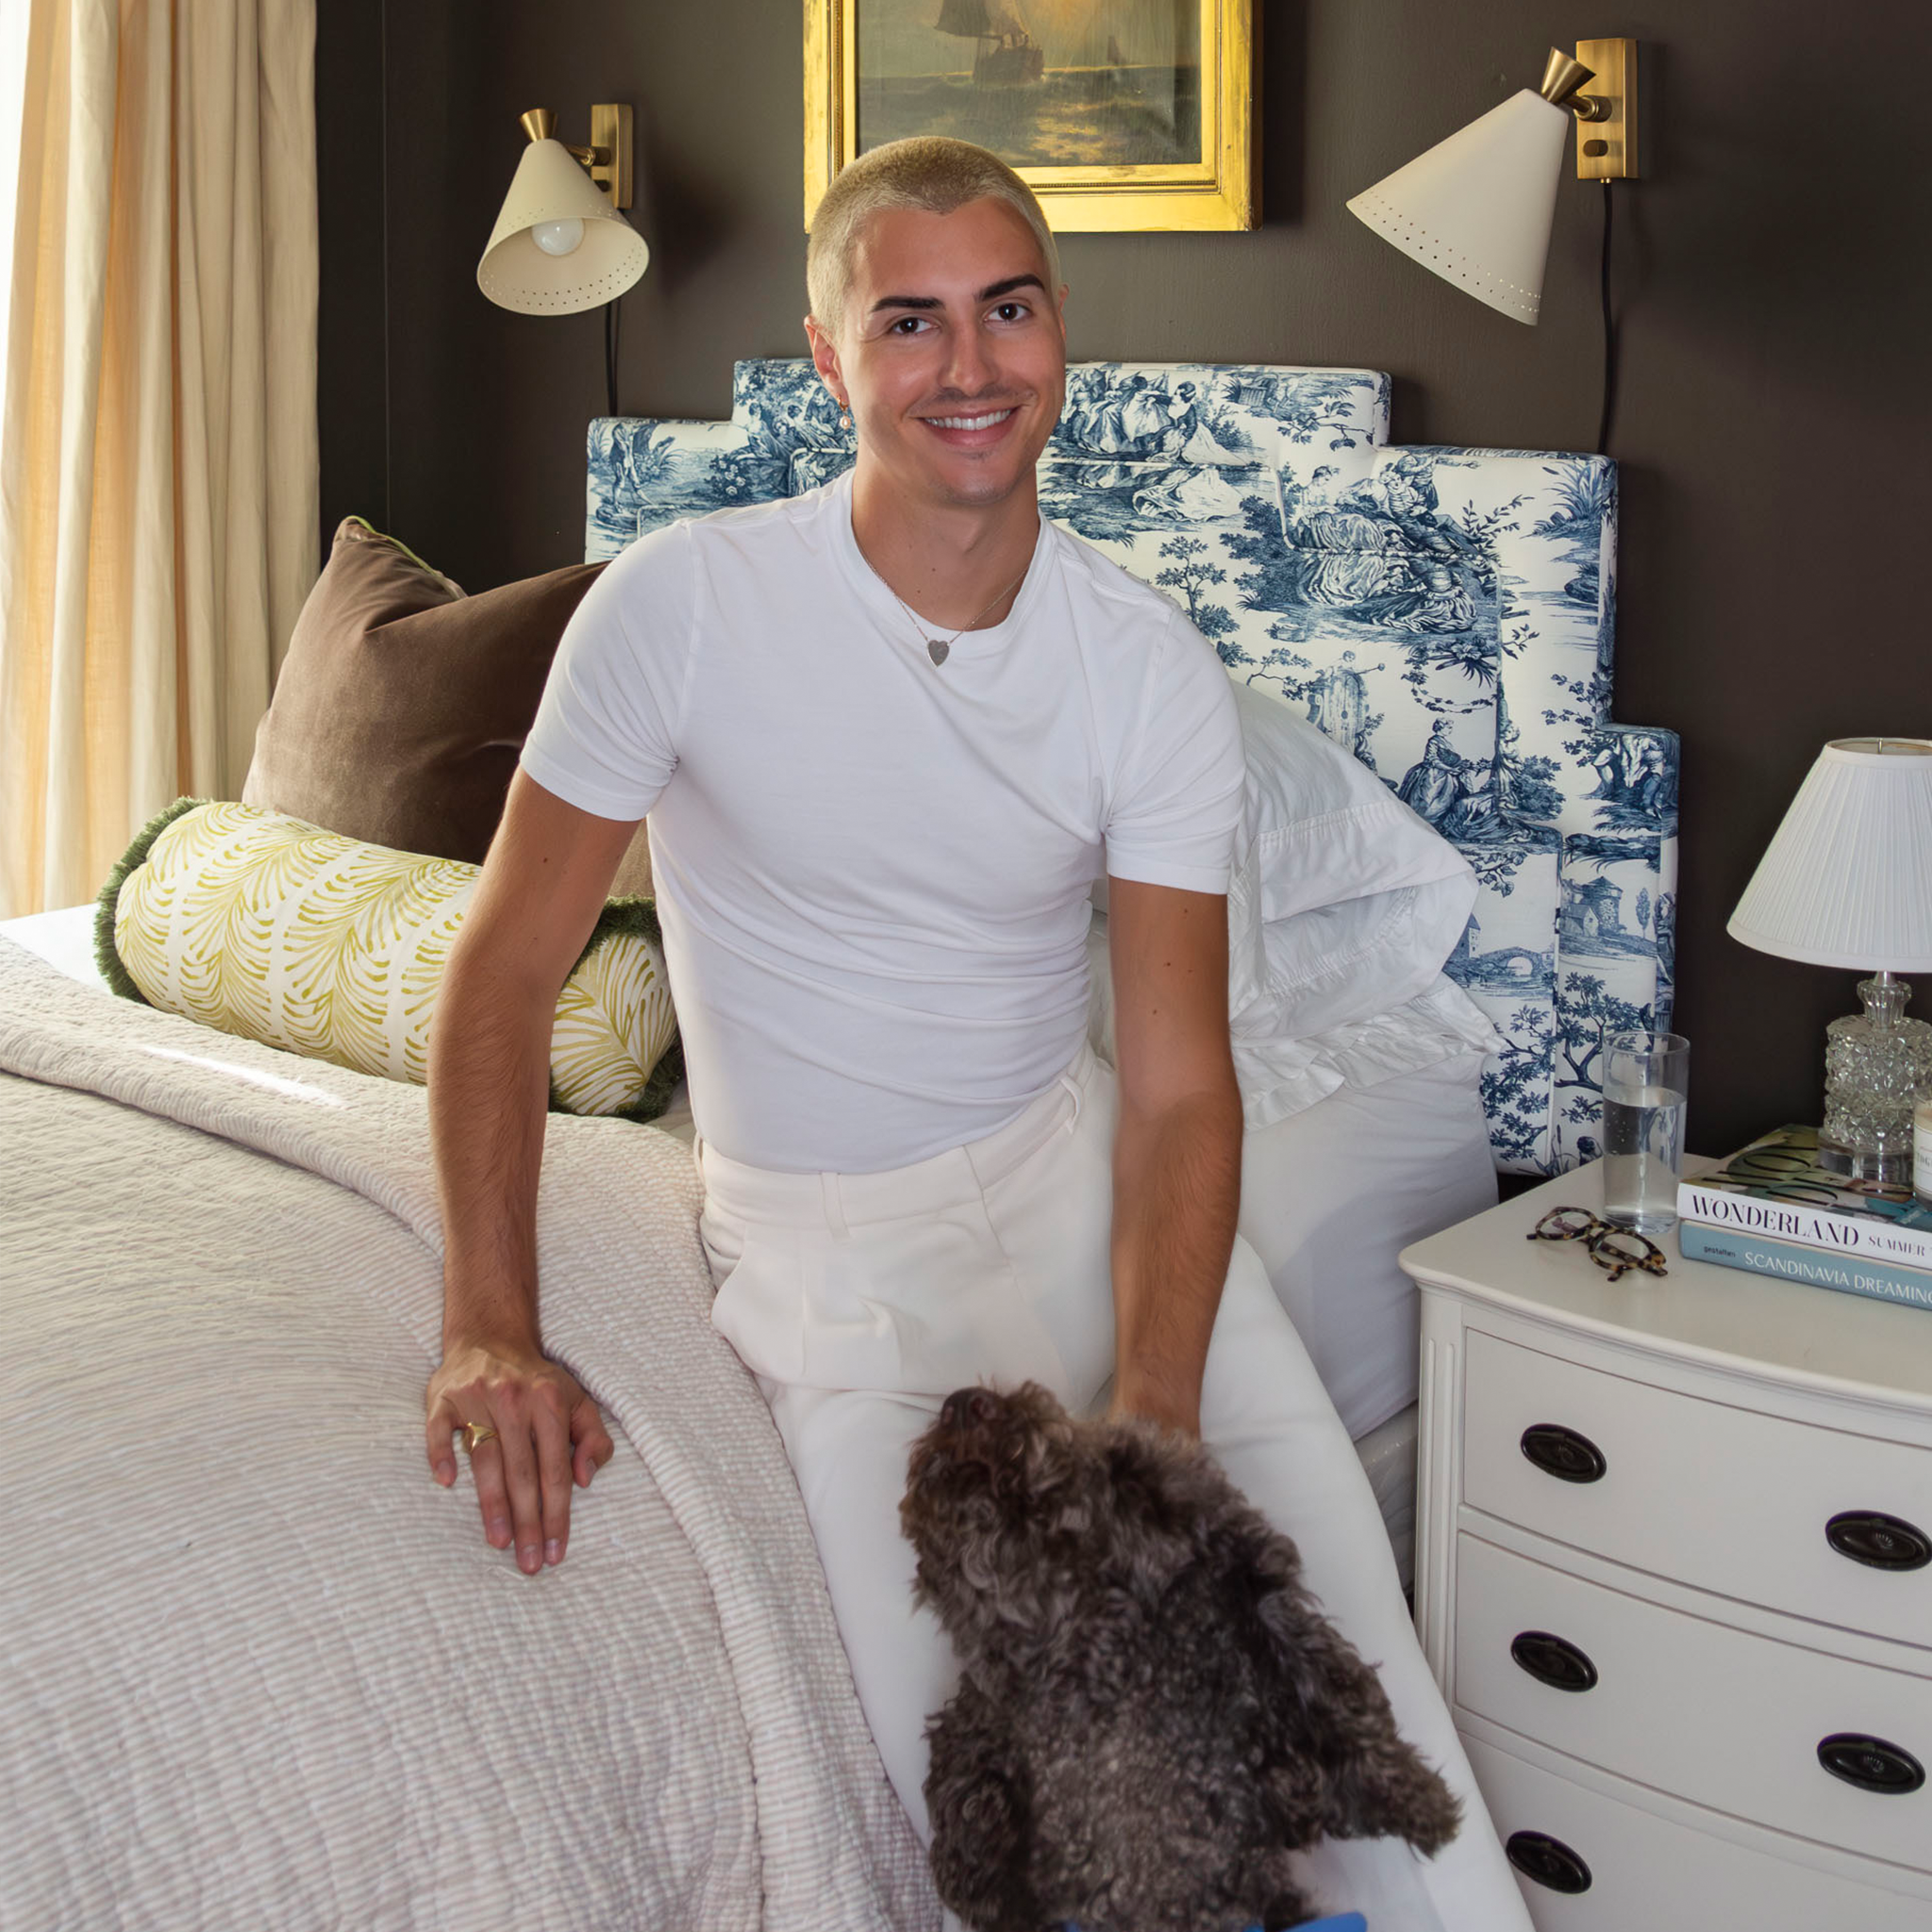 Blonde man wearing all white sitting on the corner of a white bed with one hand on a brown dog next to a dresser